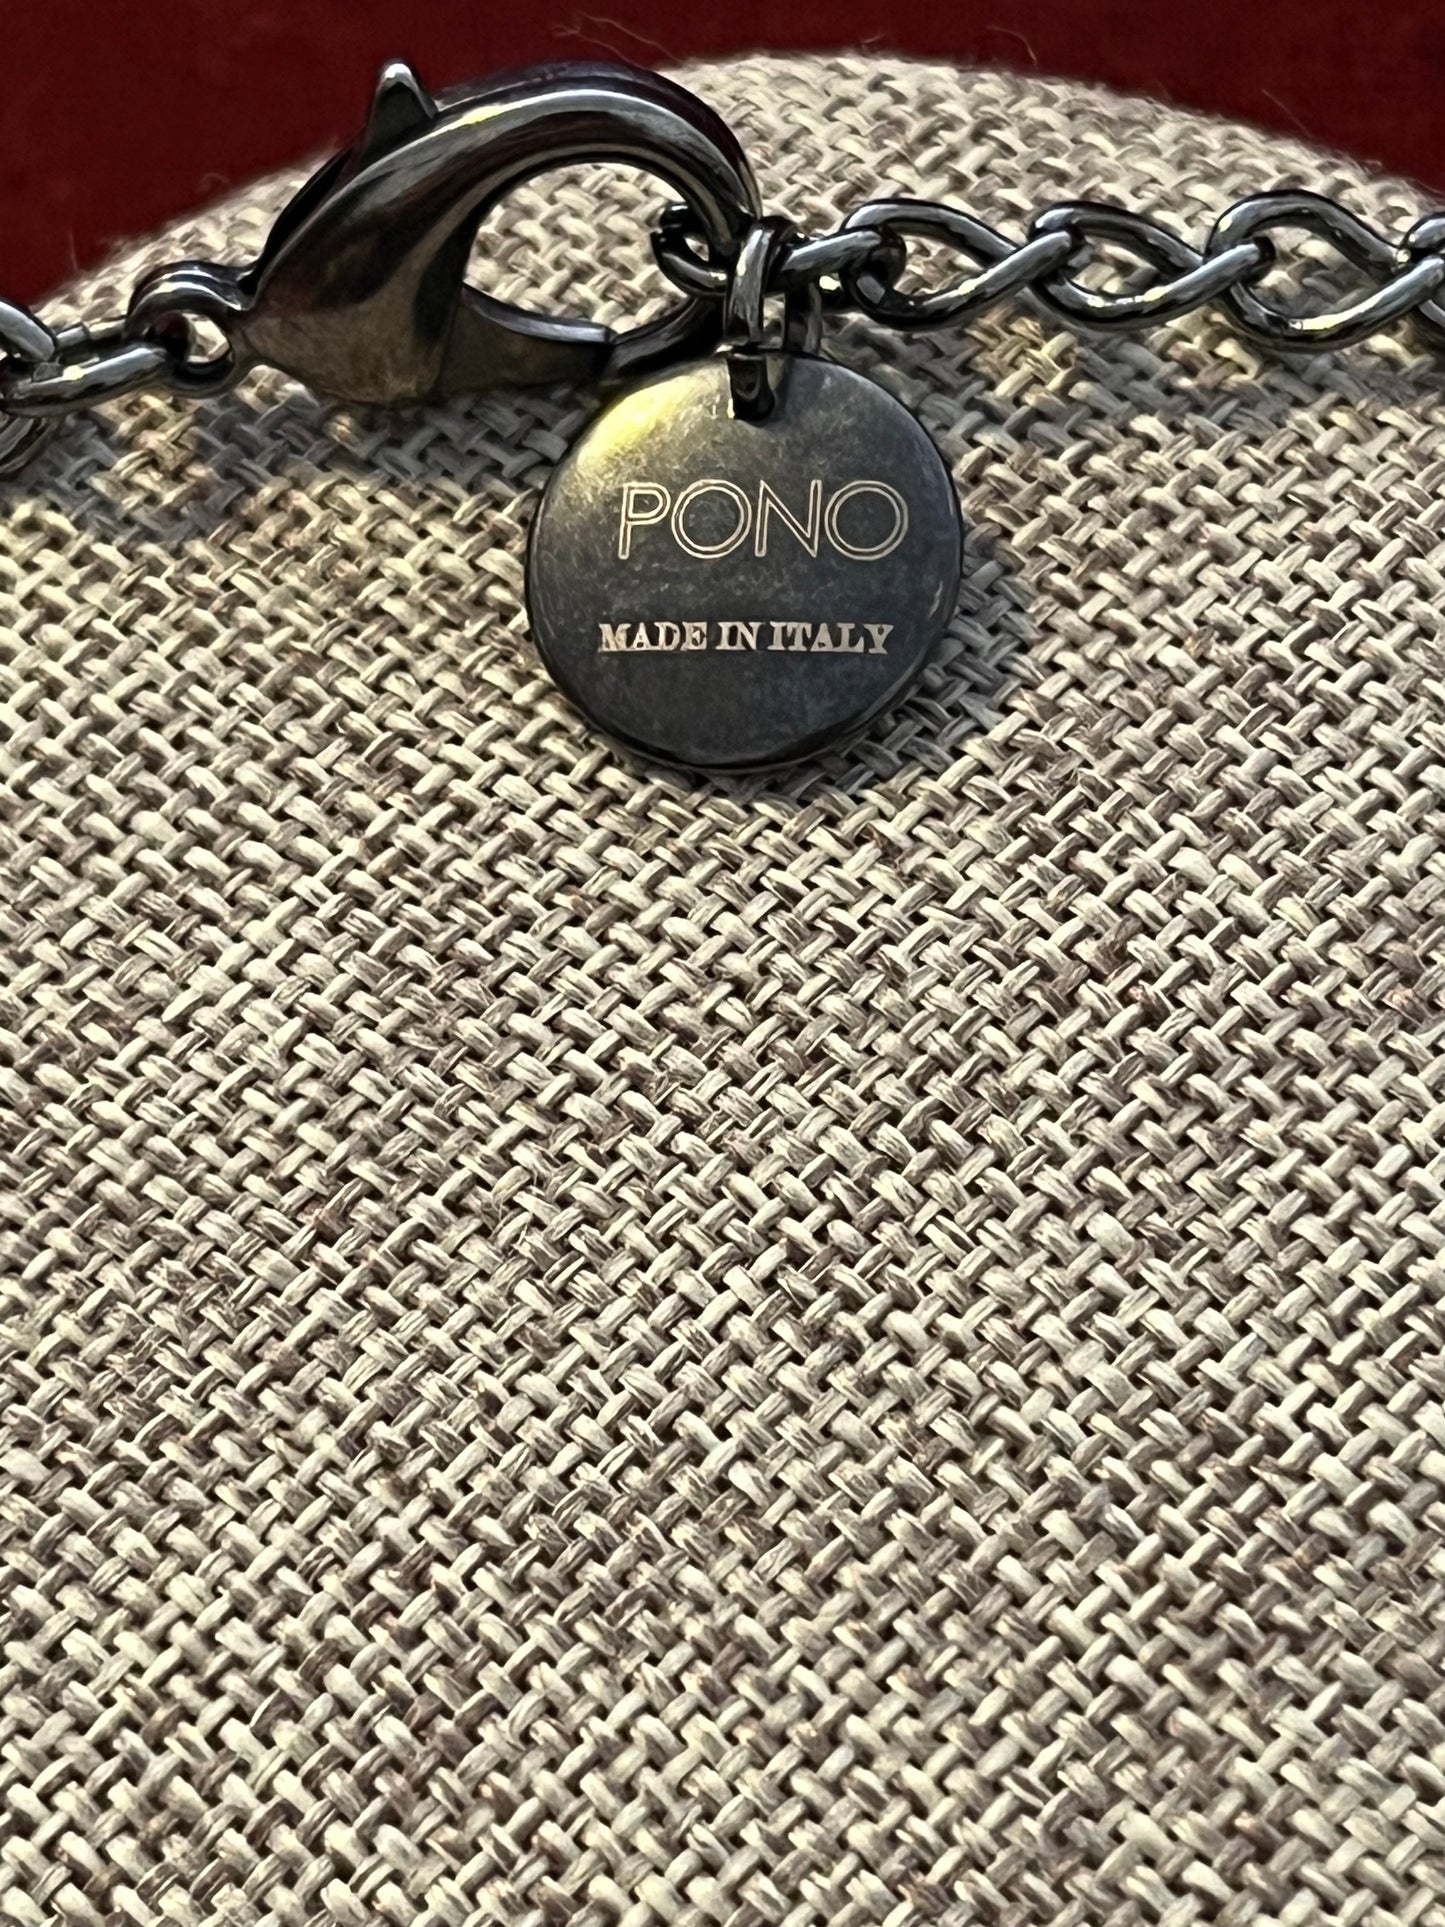 PONO Made in Italy Acrylic Disk Statement Necklace